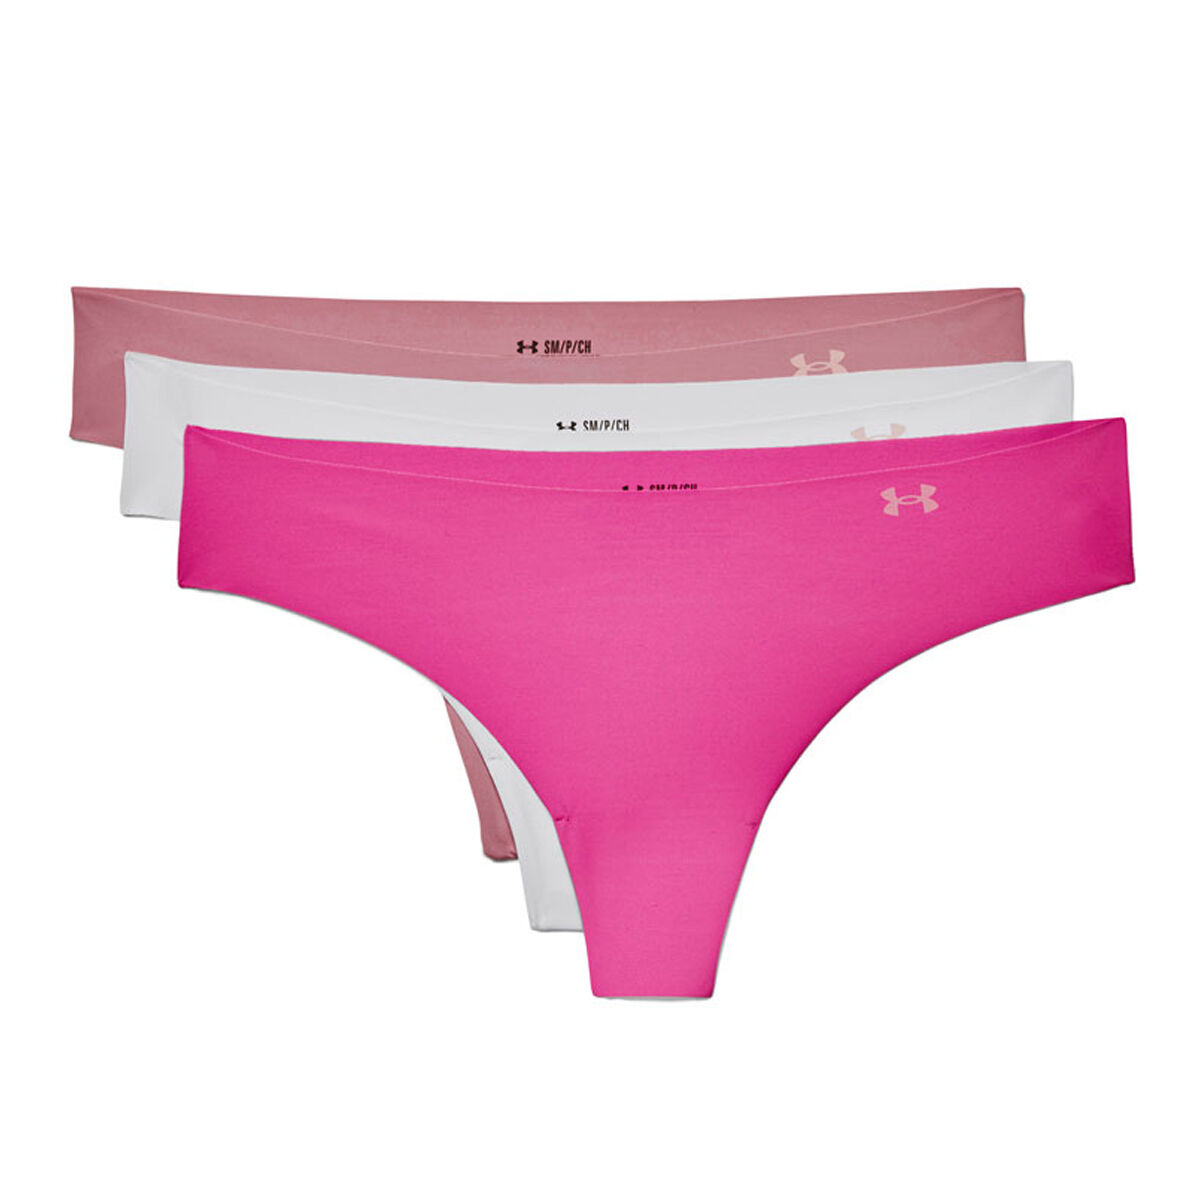 Free: EVERLAST - BIKINI UNDERWEAR - NEW WITH TAG! - Other Women's Clothing  -  Auctions for Free Stuff